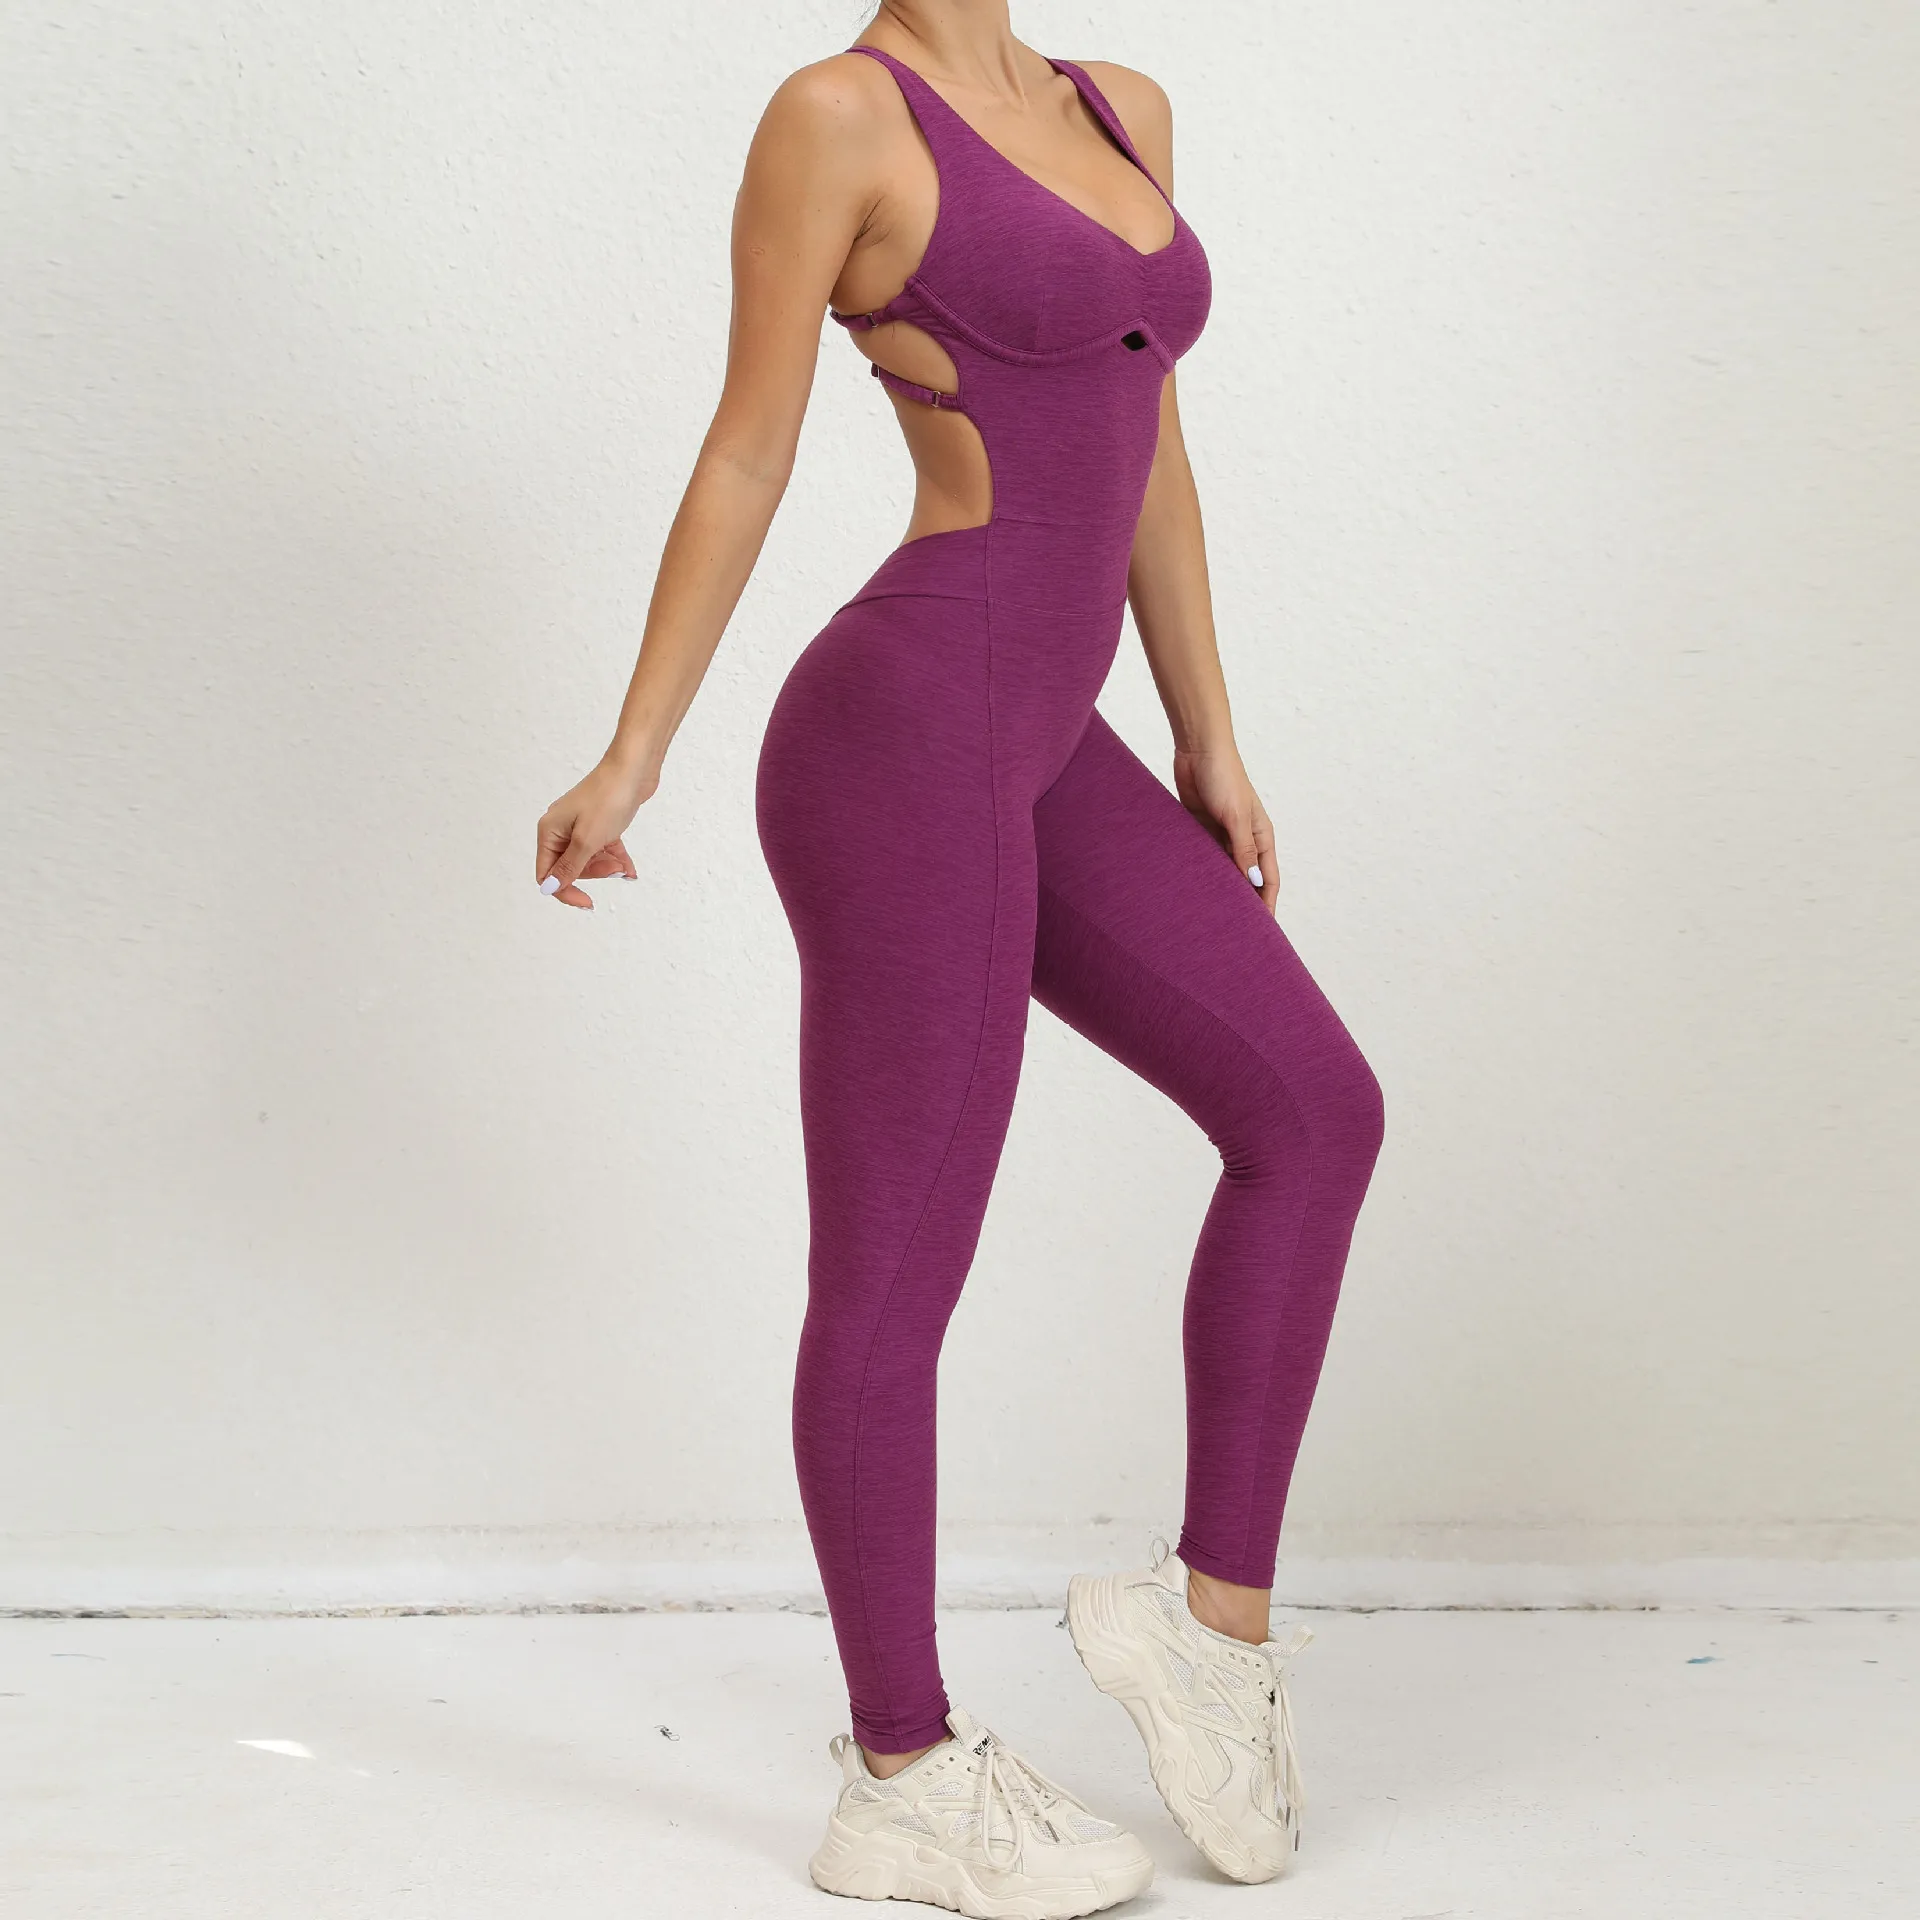 Women's Gym Workout Playsuit Bodysuit Gym Fitness Women Clothes One Piece Romper Tummy Control Yoga Jumpsuit Gym Sports Rompers